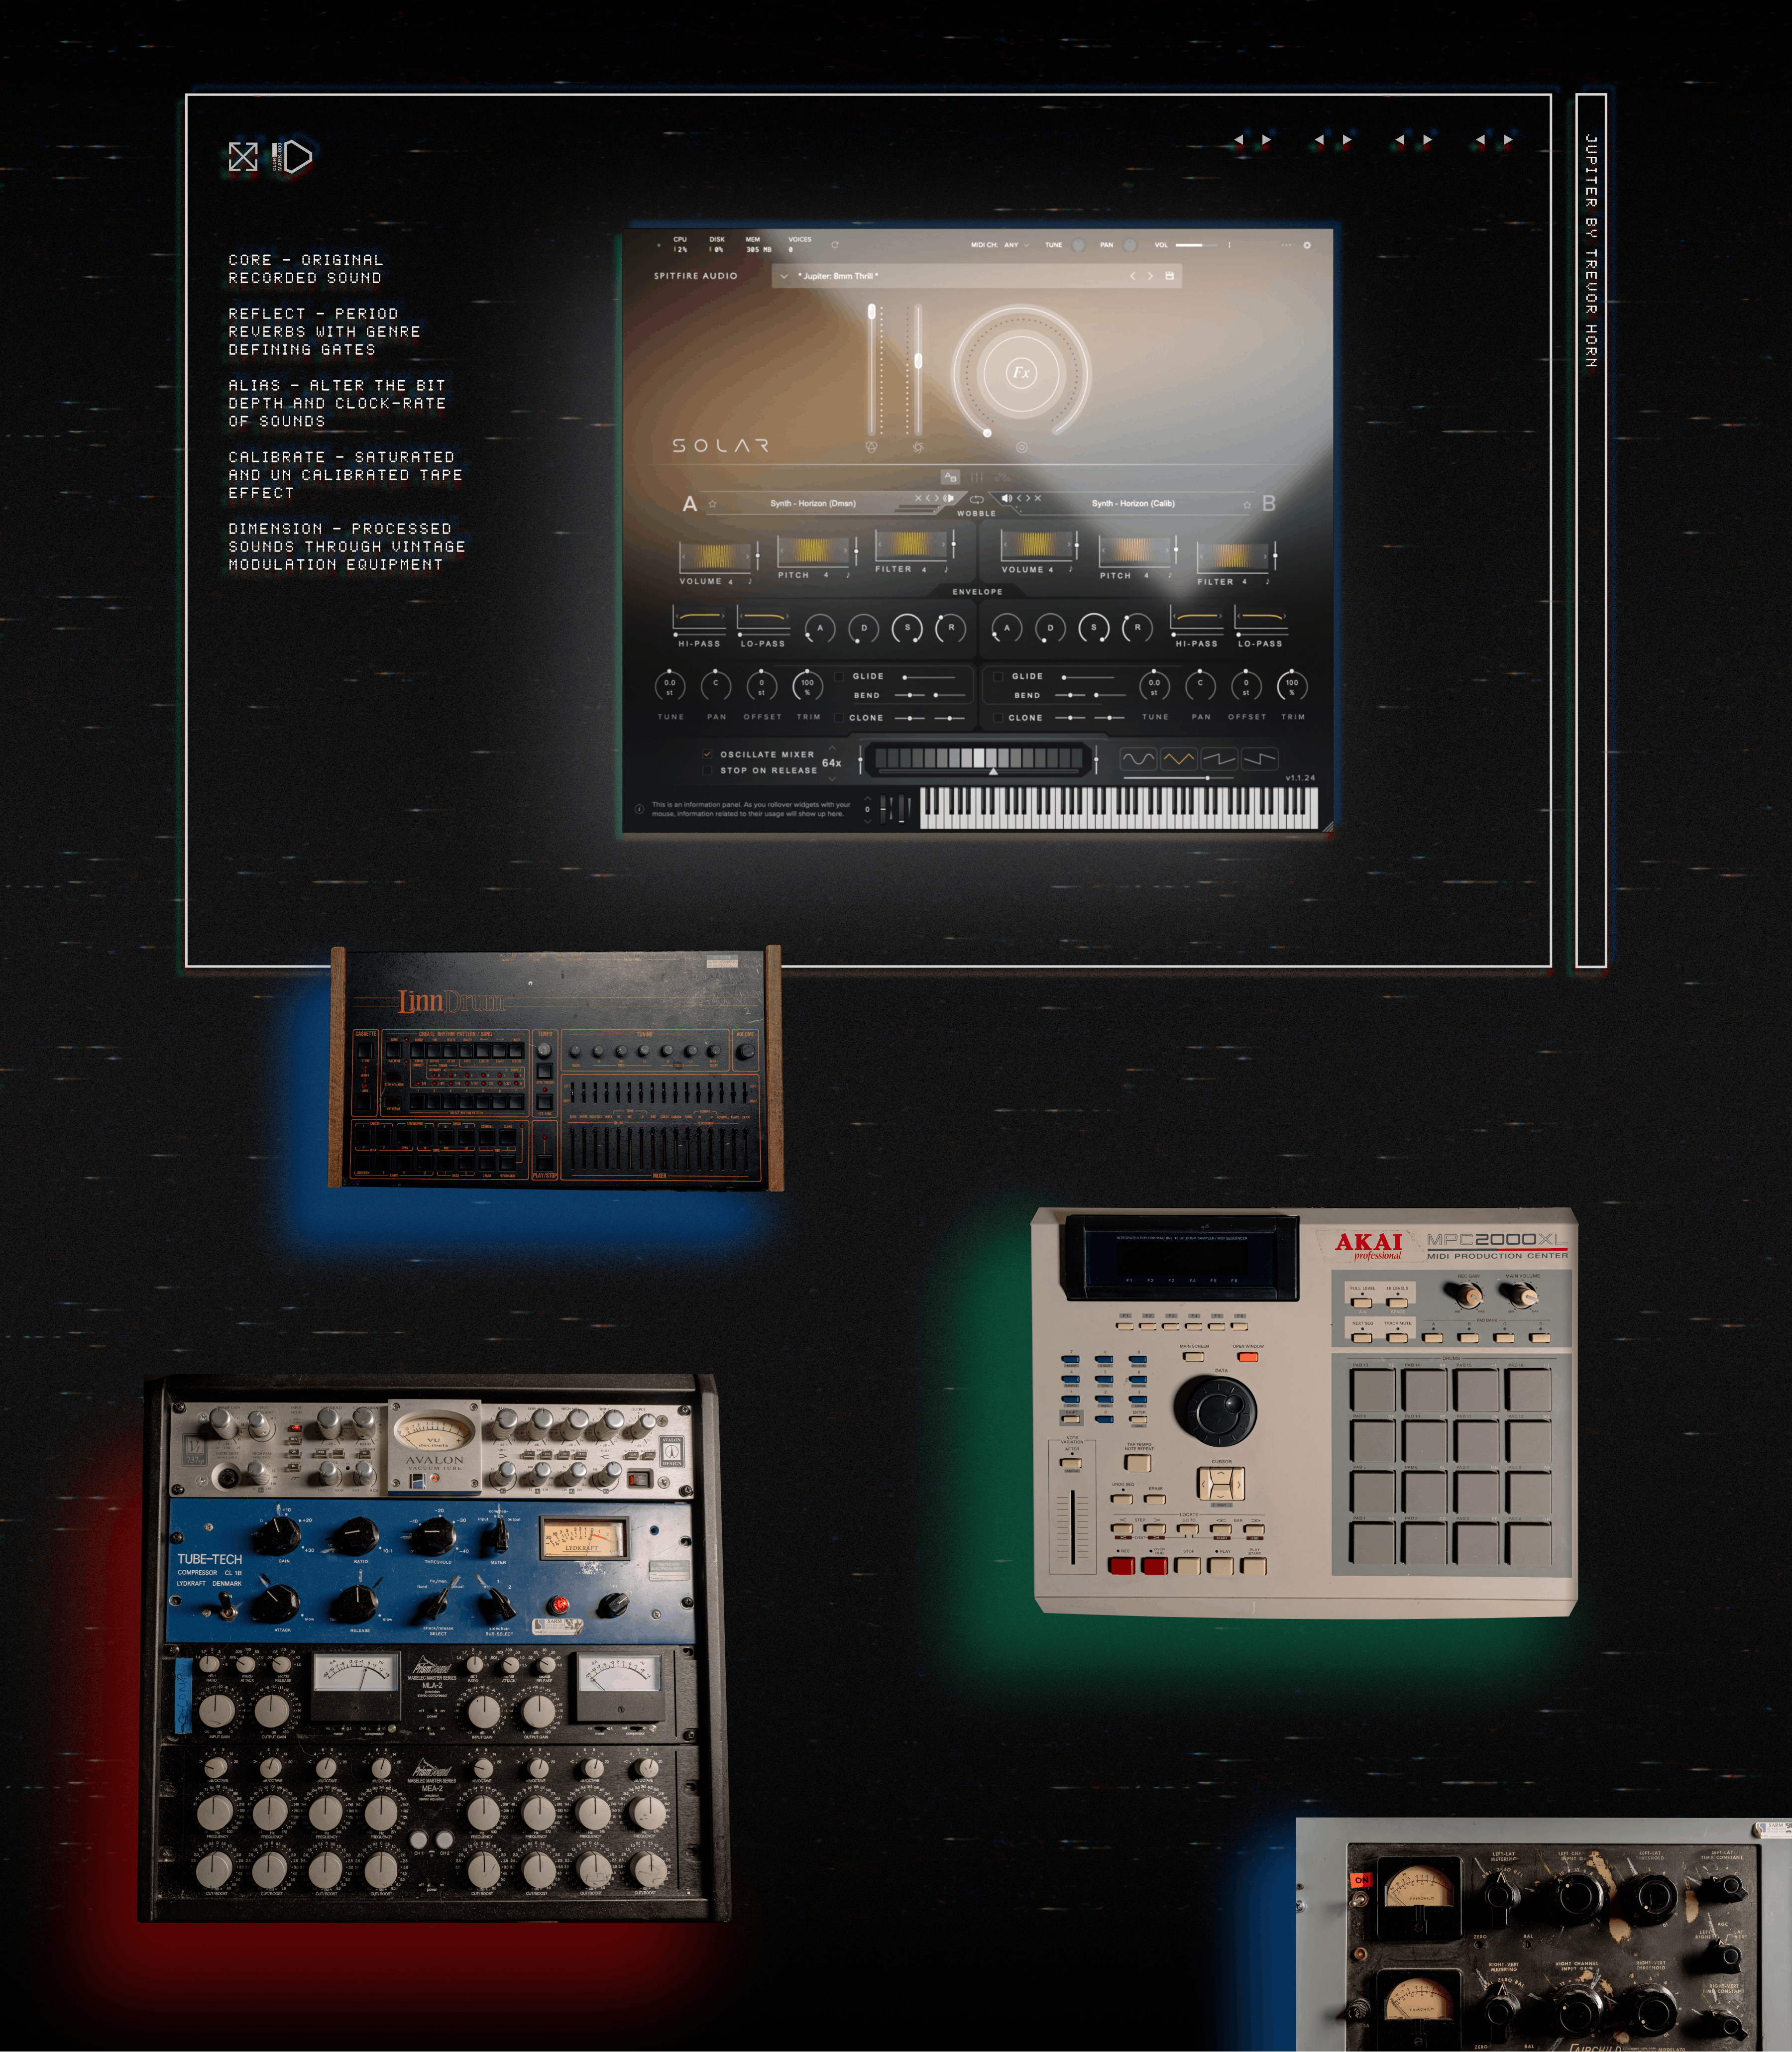 Top: The Jupiter plugin's interface. Bottom: Hardware and outboard gear used in the recording process.